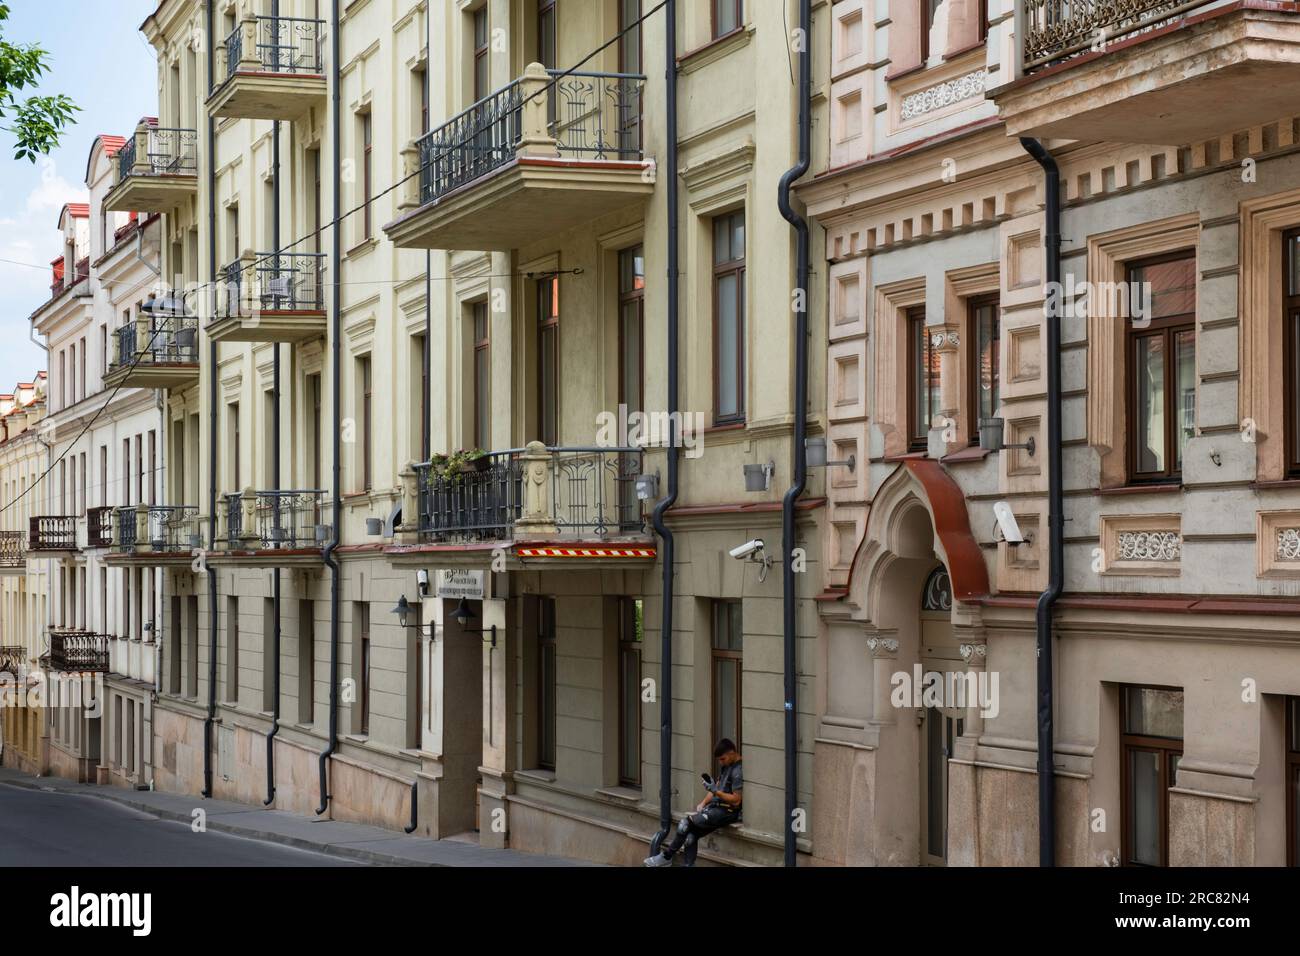 Descending street in Vilnius with facades of old gloomy historical buildings in pastel shades, many with balconies. A man looks at his phone Stock Photo